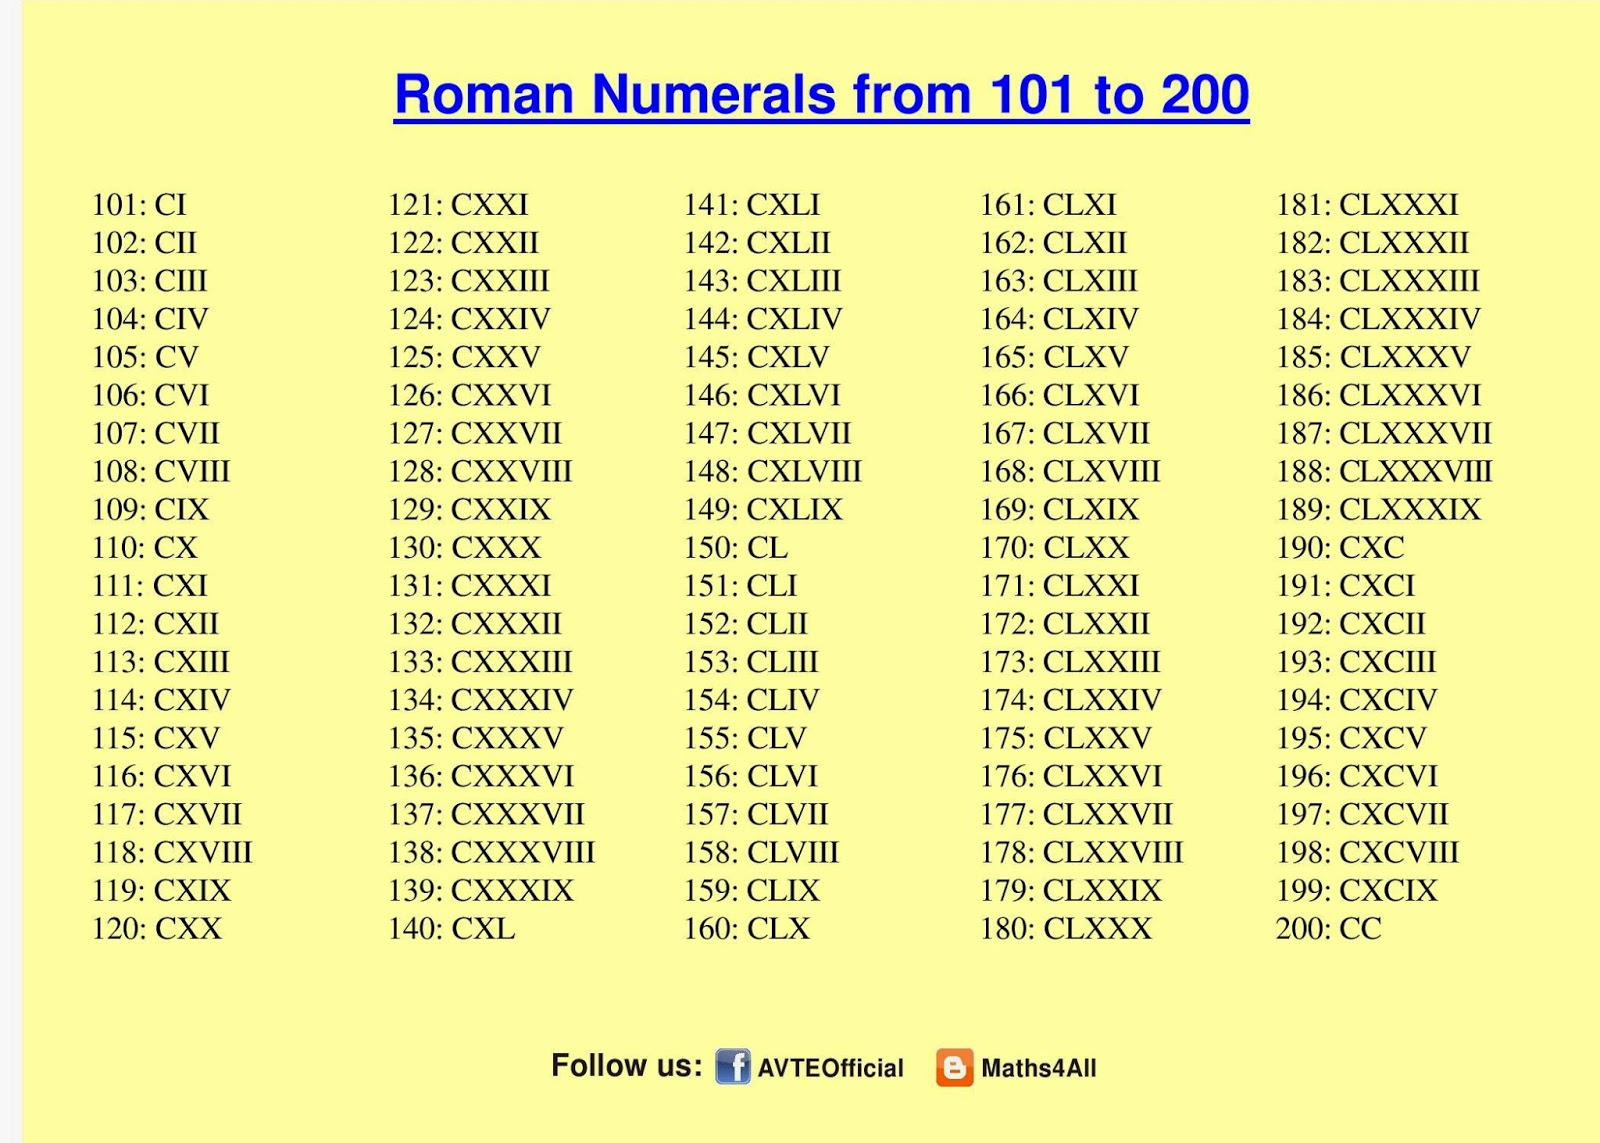 Maths4all ROMAN NUMERALS 101 To 200